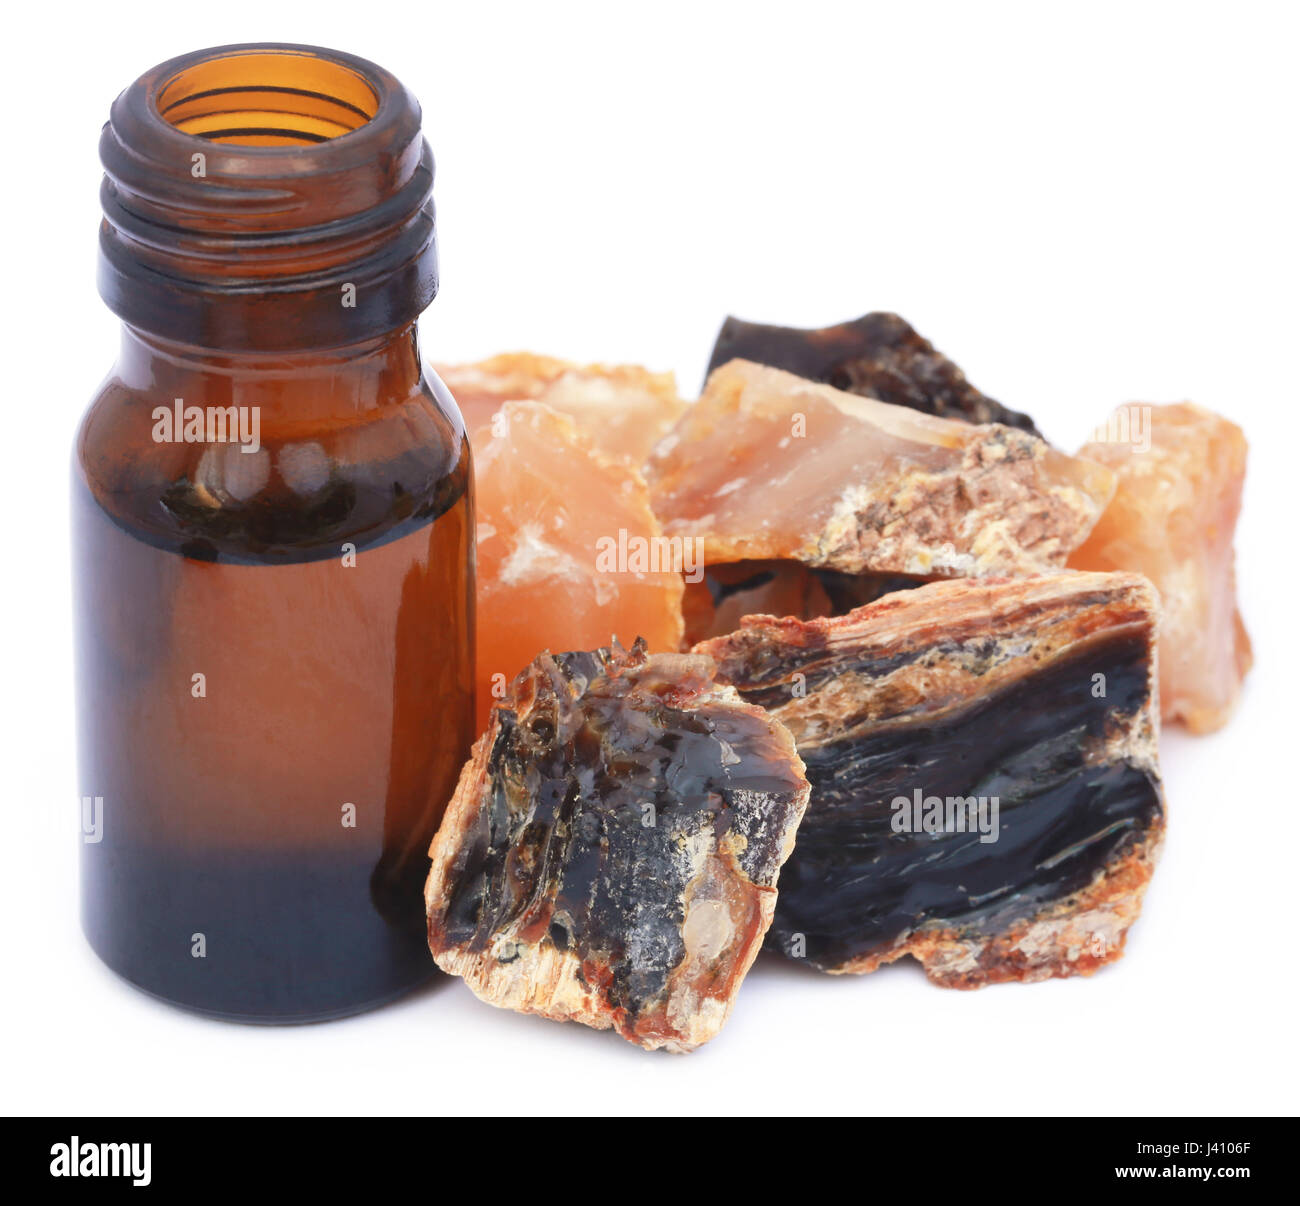 Frankincense dhoop with essential oil, a natural aromatic resin used in perfumes and incenses Stock Photo